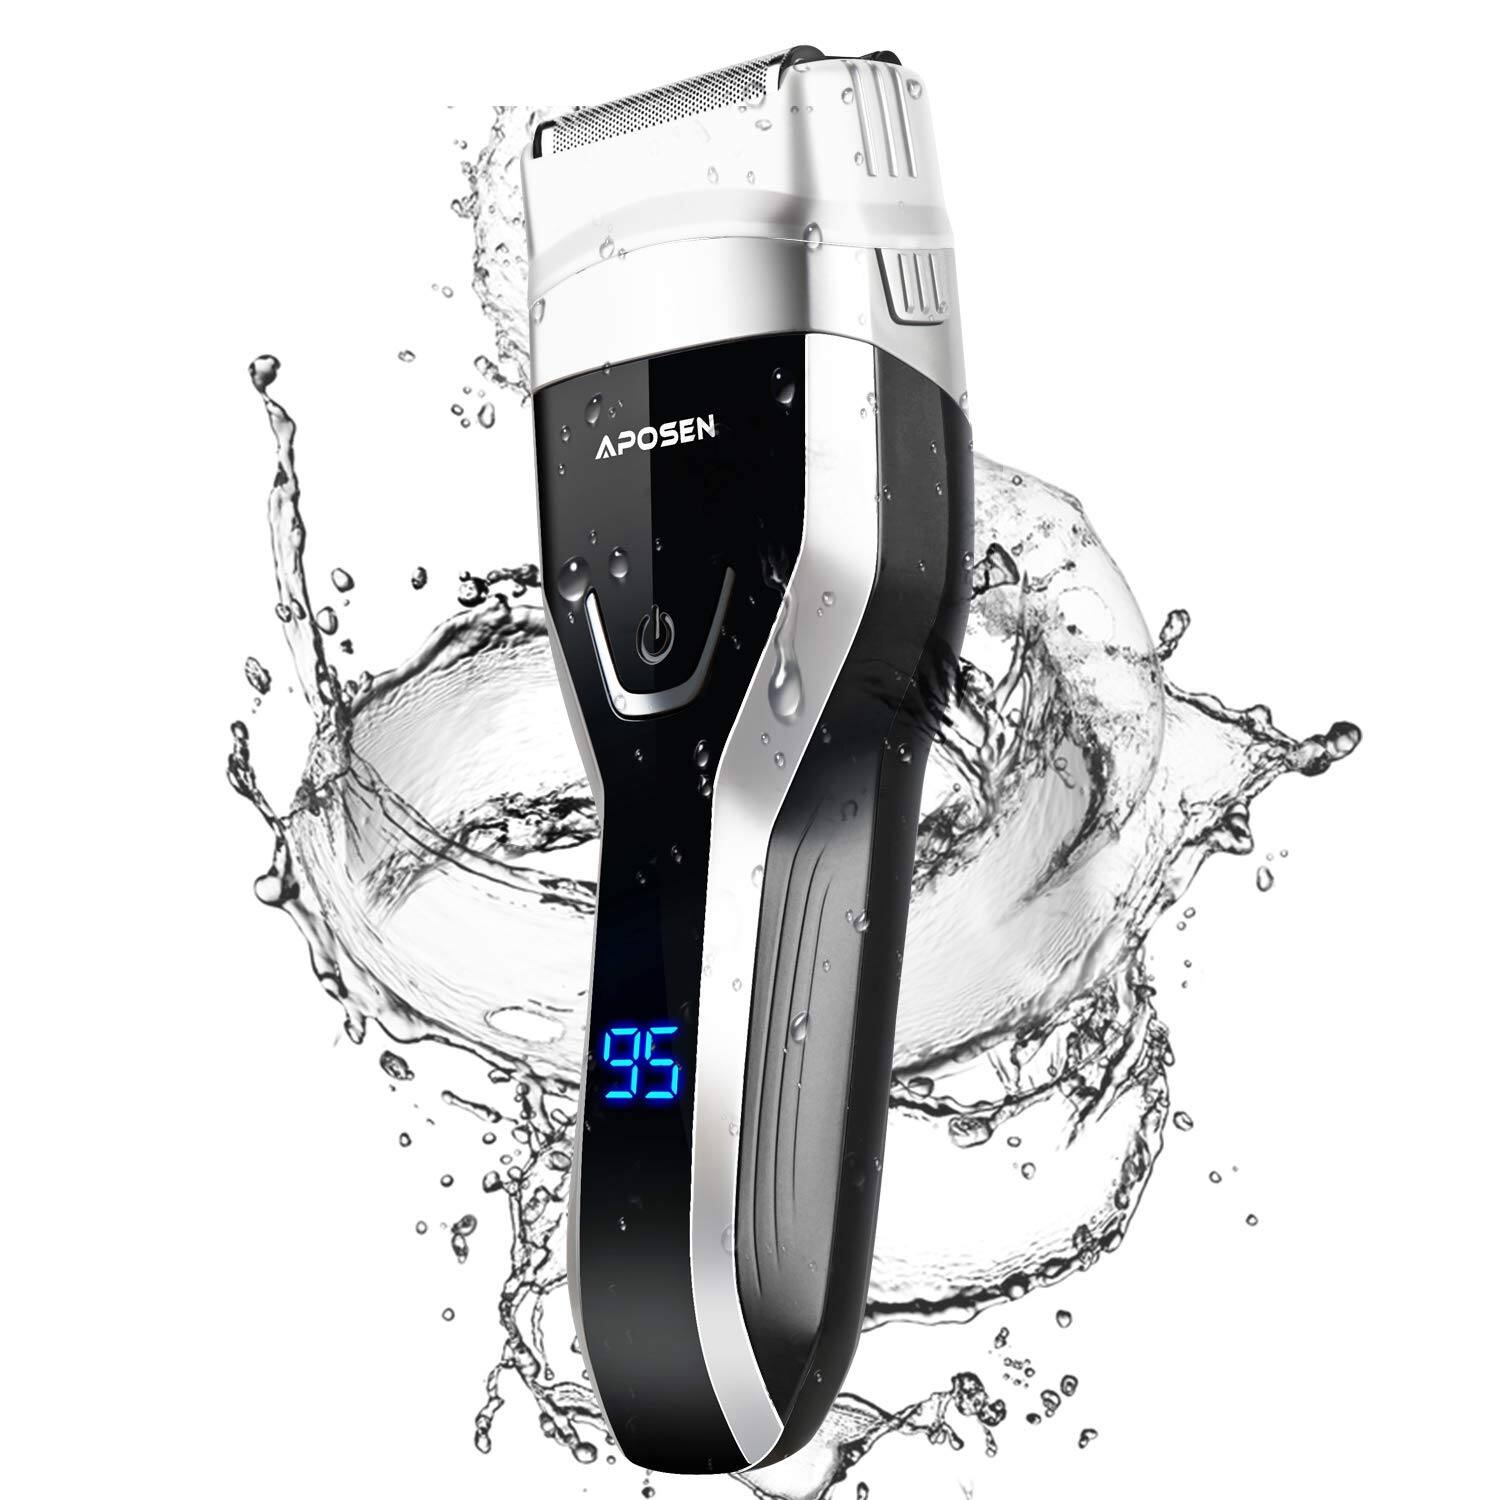 Electric Razor for Men, Aposen Men's Foil Shaver, Wet/Dry IPX7 Waterproof, USB Rechargeable Cordless Wet Dry $13.20 + Free Shipping